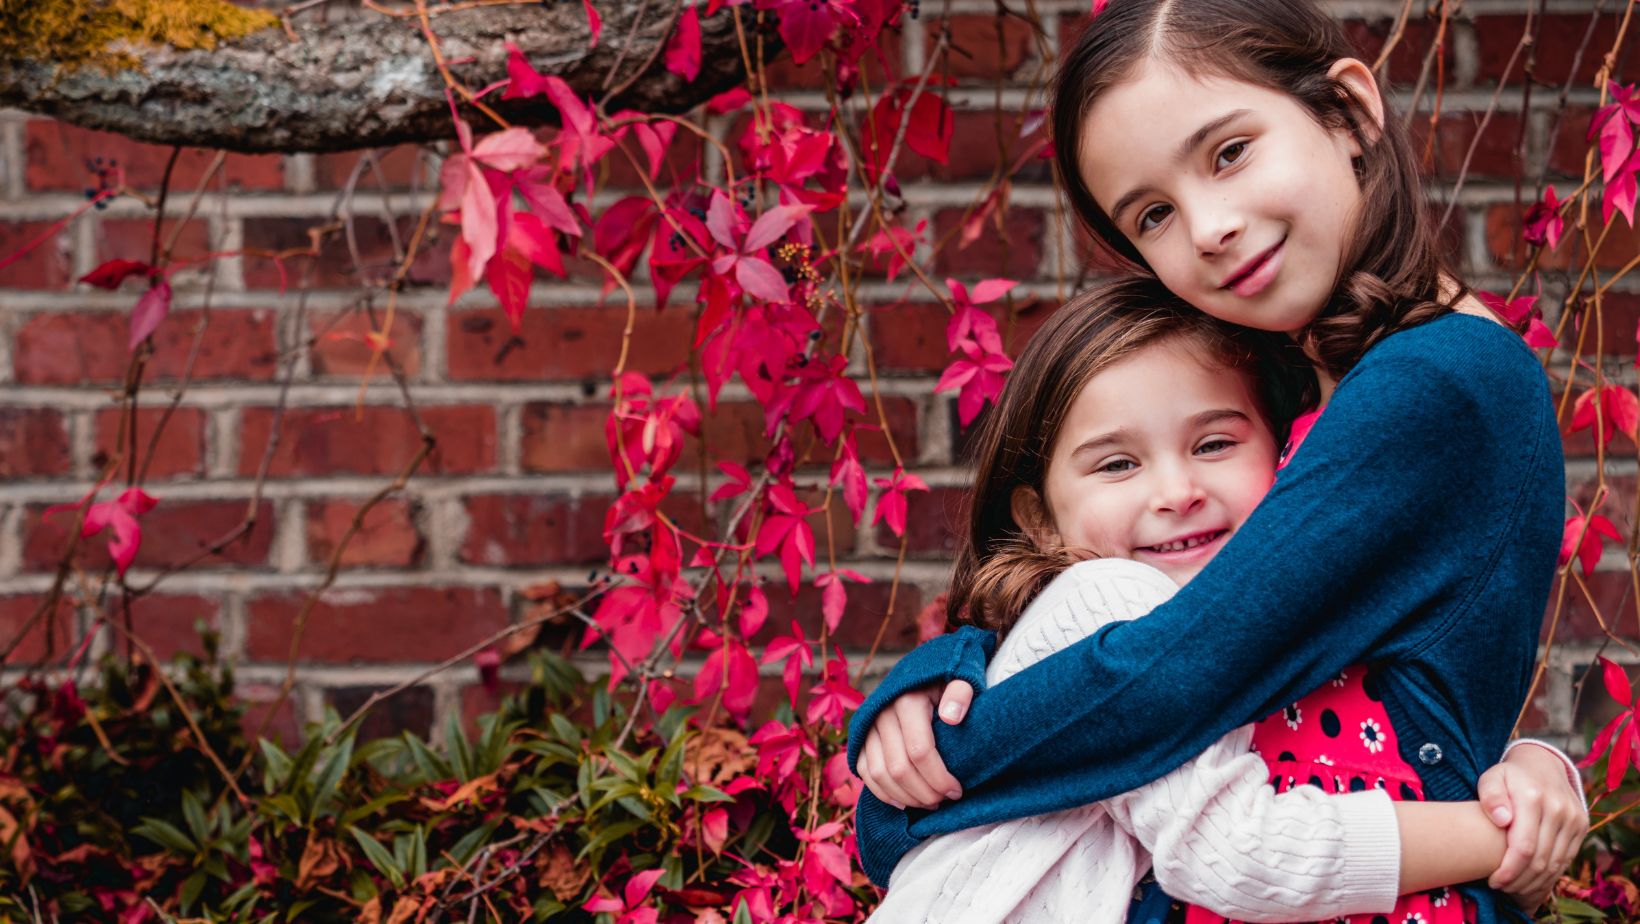 Dynamics of Sibling Relationships: Why Are Older Brothers so Mean to Younger Sisters